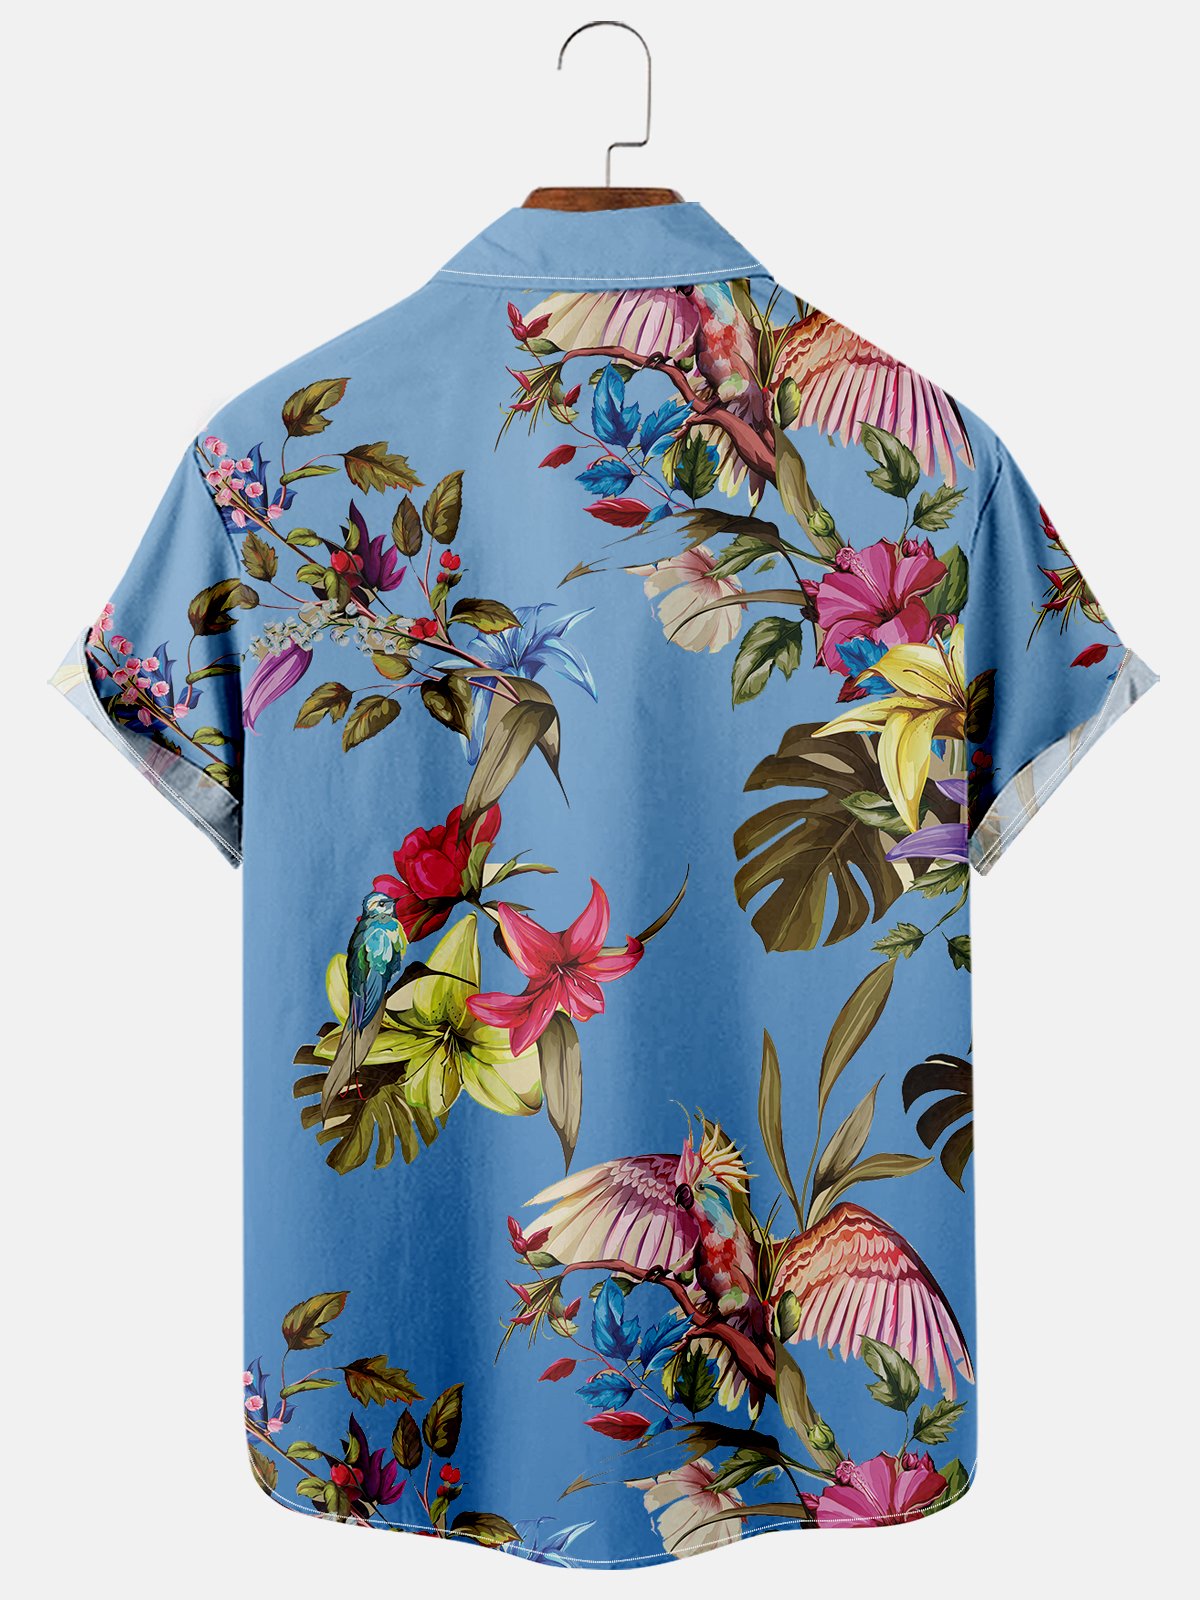 Floral Parrot Print Everyday Casual Comfort Shirt